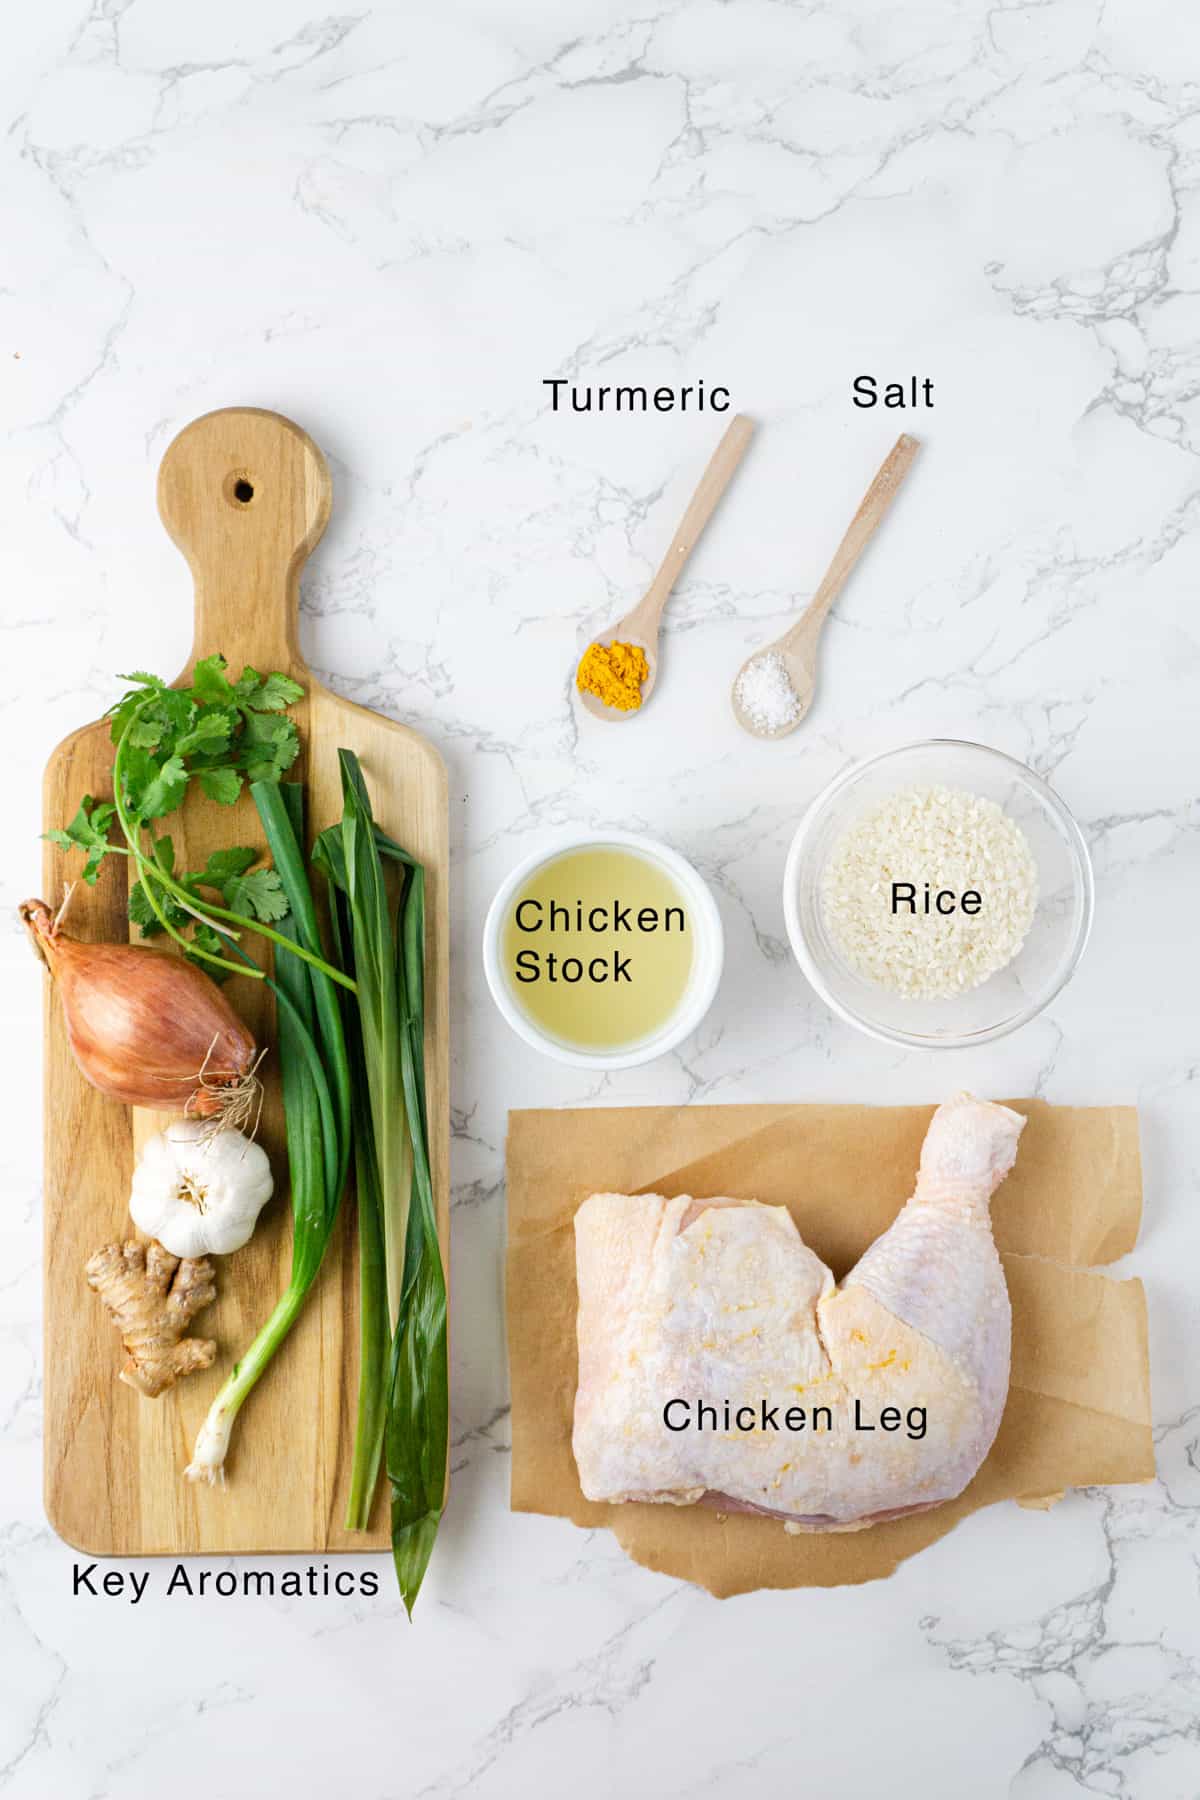 Ingredients for the hainan chicken laid out on a table.